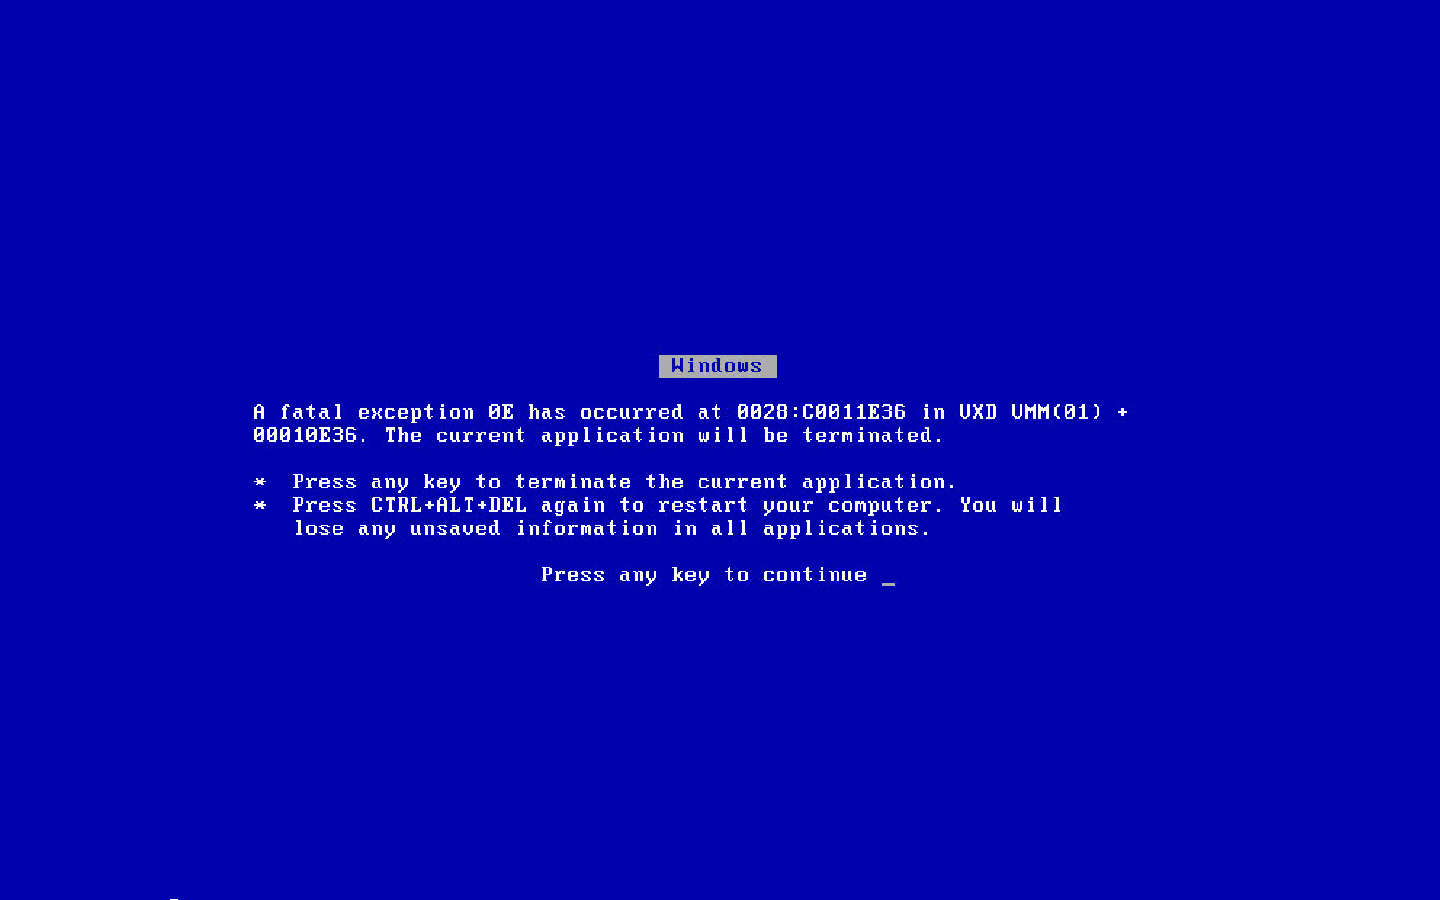 MS DOS Wallpaper Free MS DOS Background